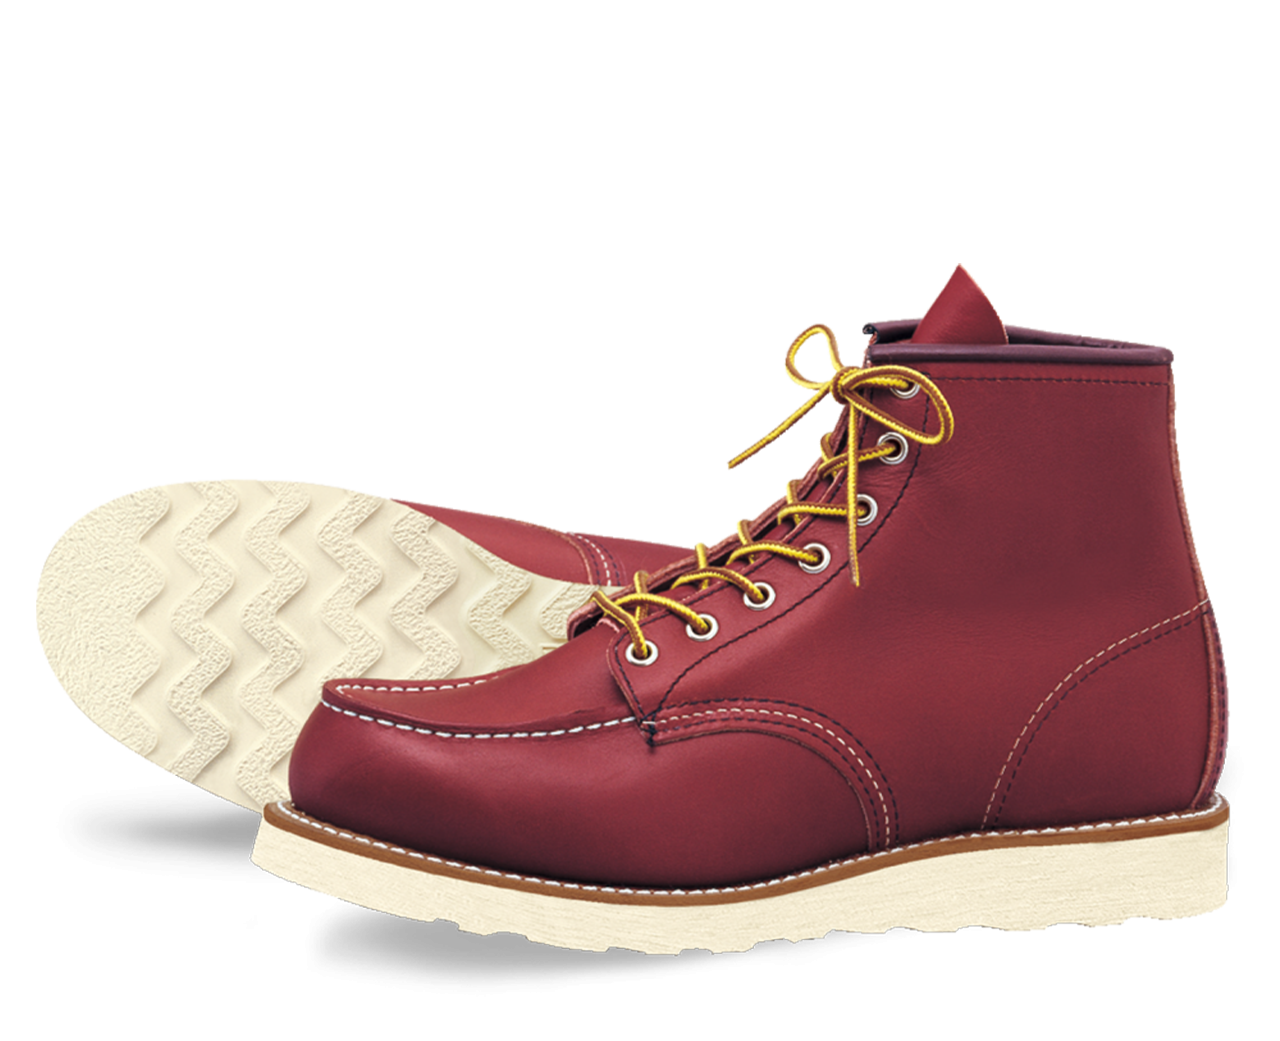 Red Wing 8875 Moc Toe